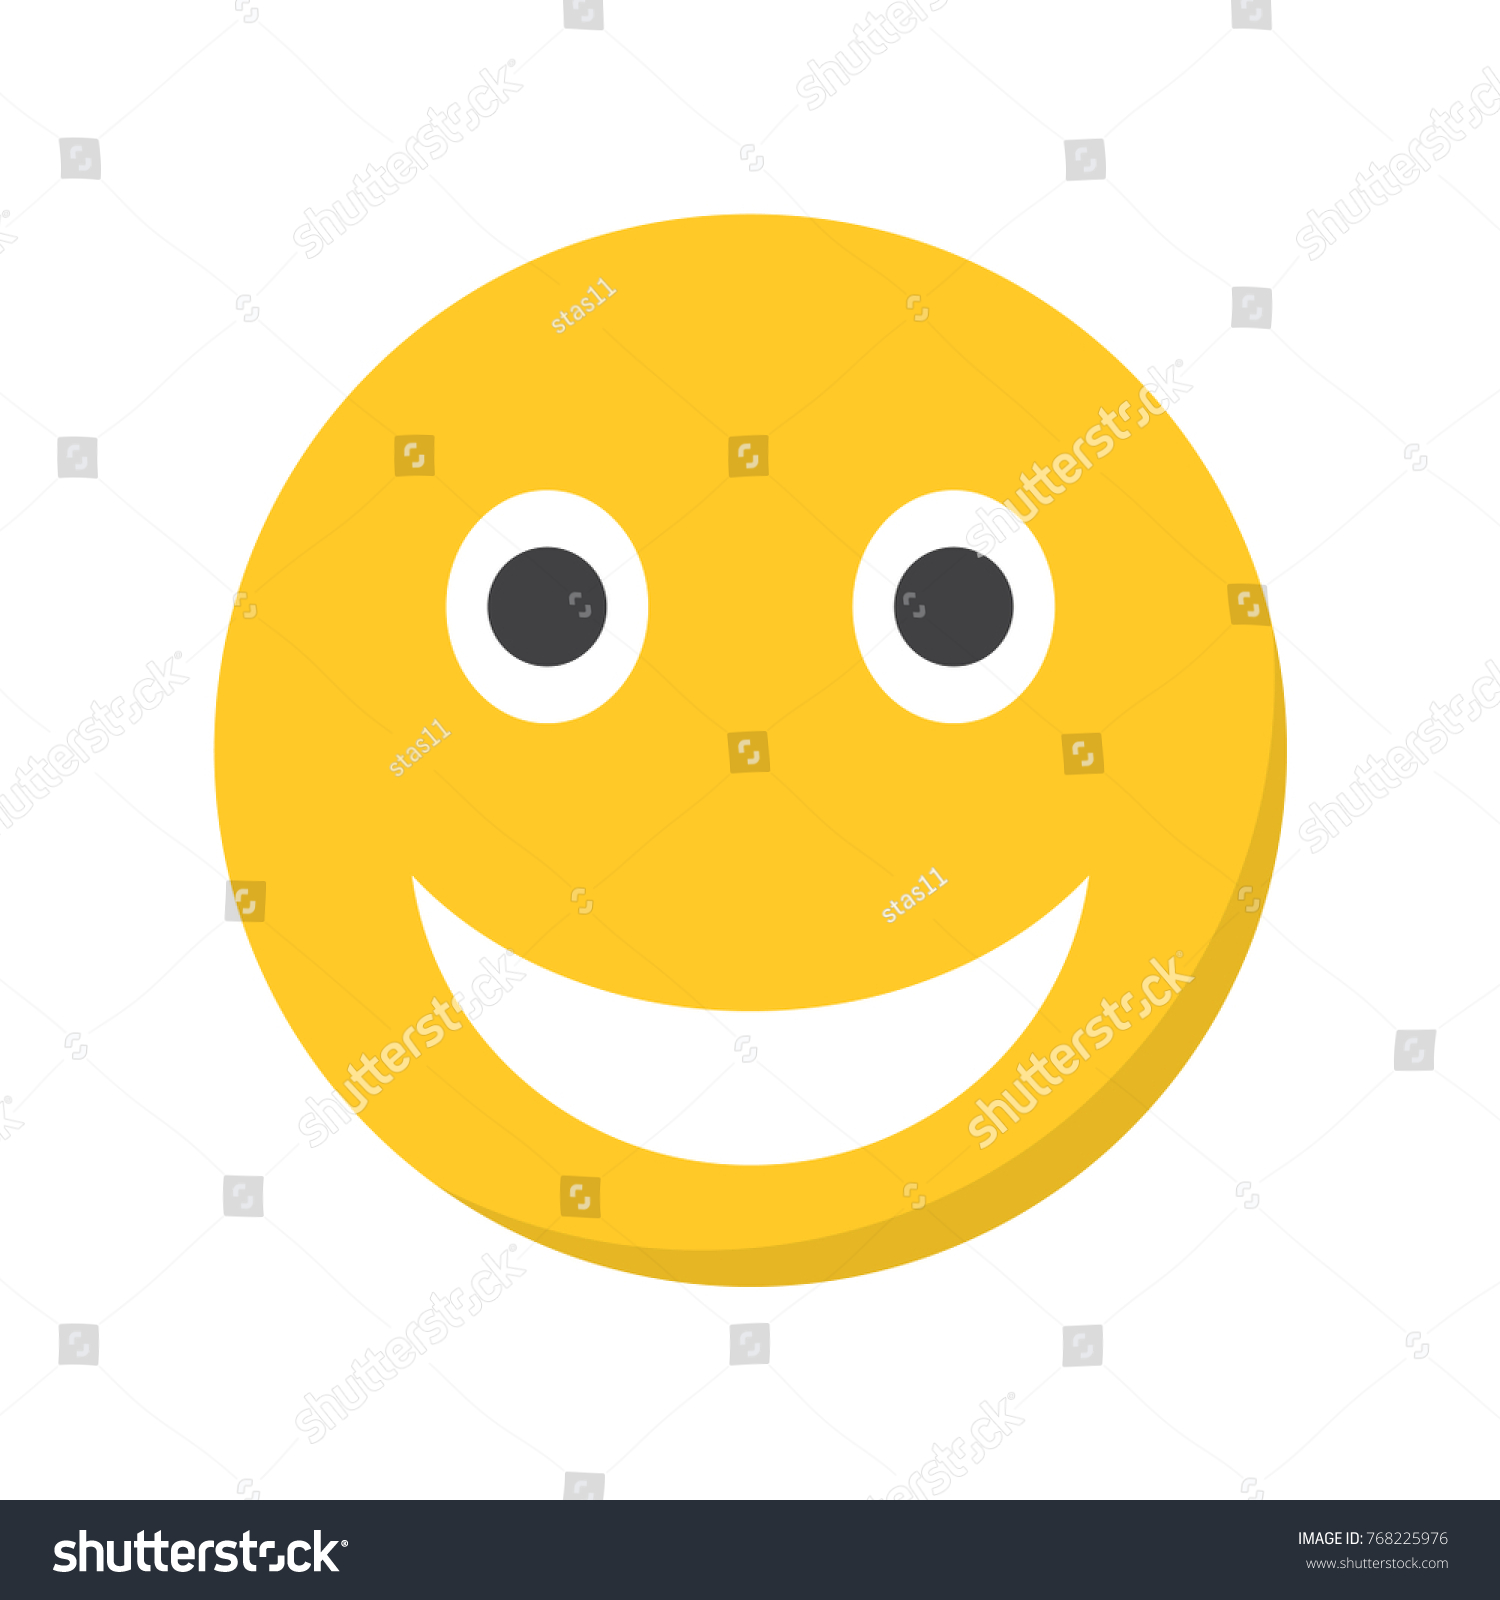 Smiling Emoji Open Mouth Vector Illustration Stock Vector (Royalty Free ...